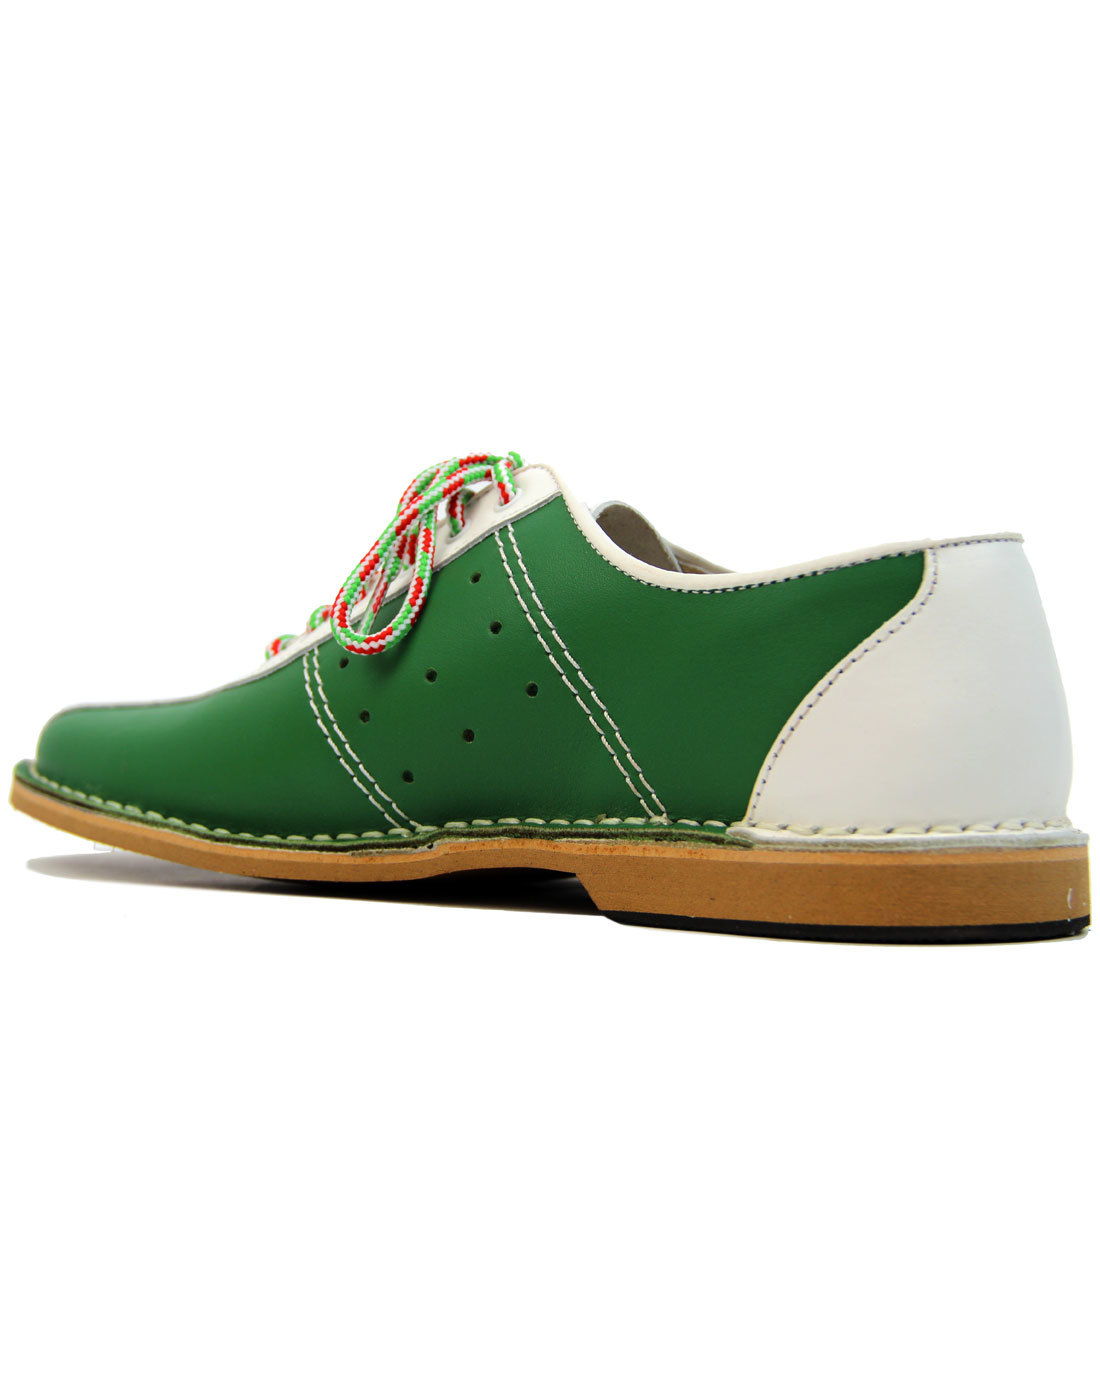 Watts Italia Bowling Shoes | DELICIOUS JUNCTION Retro 60s Mod Shoes